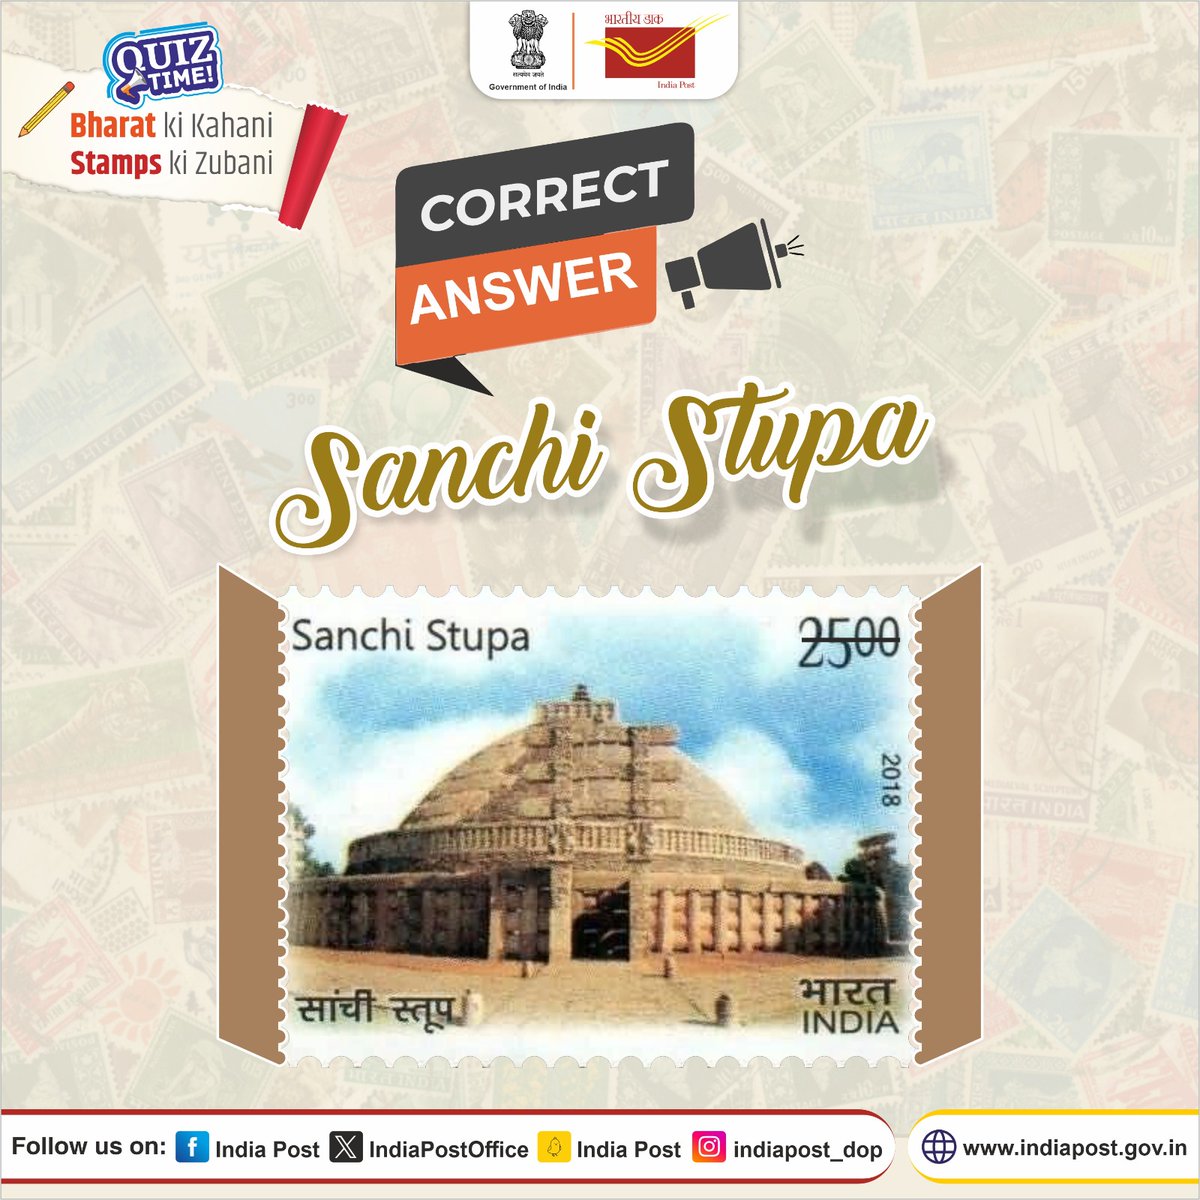 Congratulations to @Ashok_Das_12 for acing our quiz! The correct answer was Sanchi Stupa. Thanks to everyone who participated. Stay tuned for more thrilling challenges! #IndiaPost #Stampskizubani